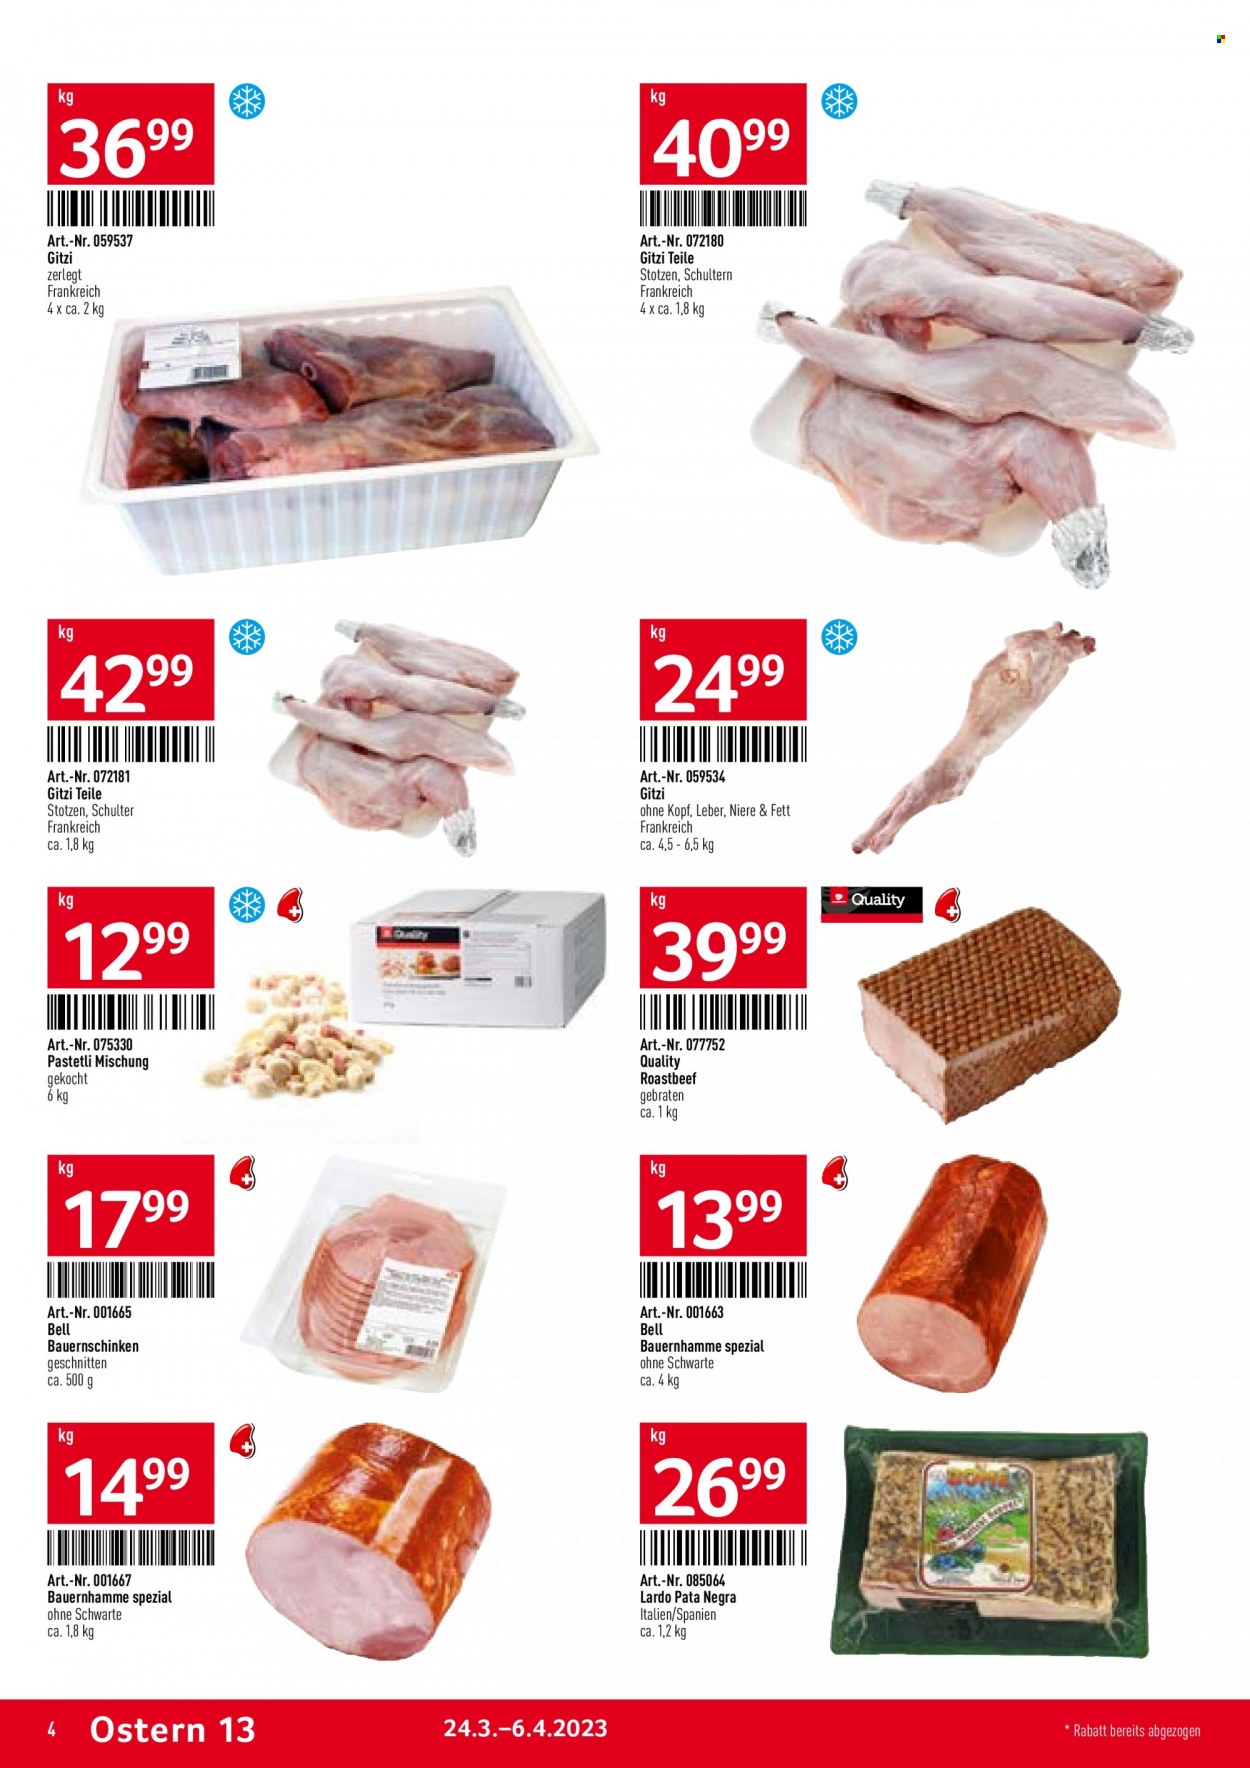 Catalogue TransGourmet - 24.3.2023 - 6.4.2023. Page 4.